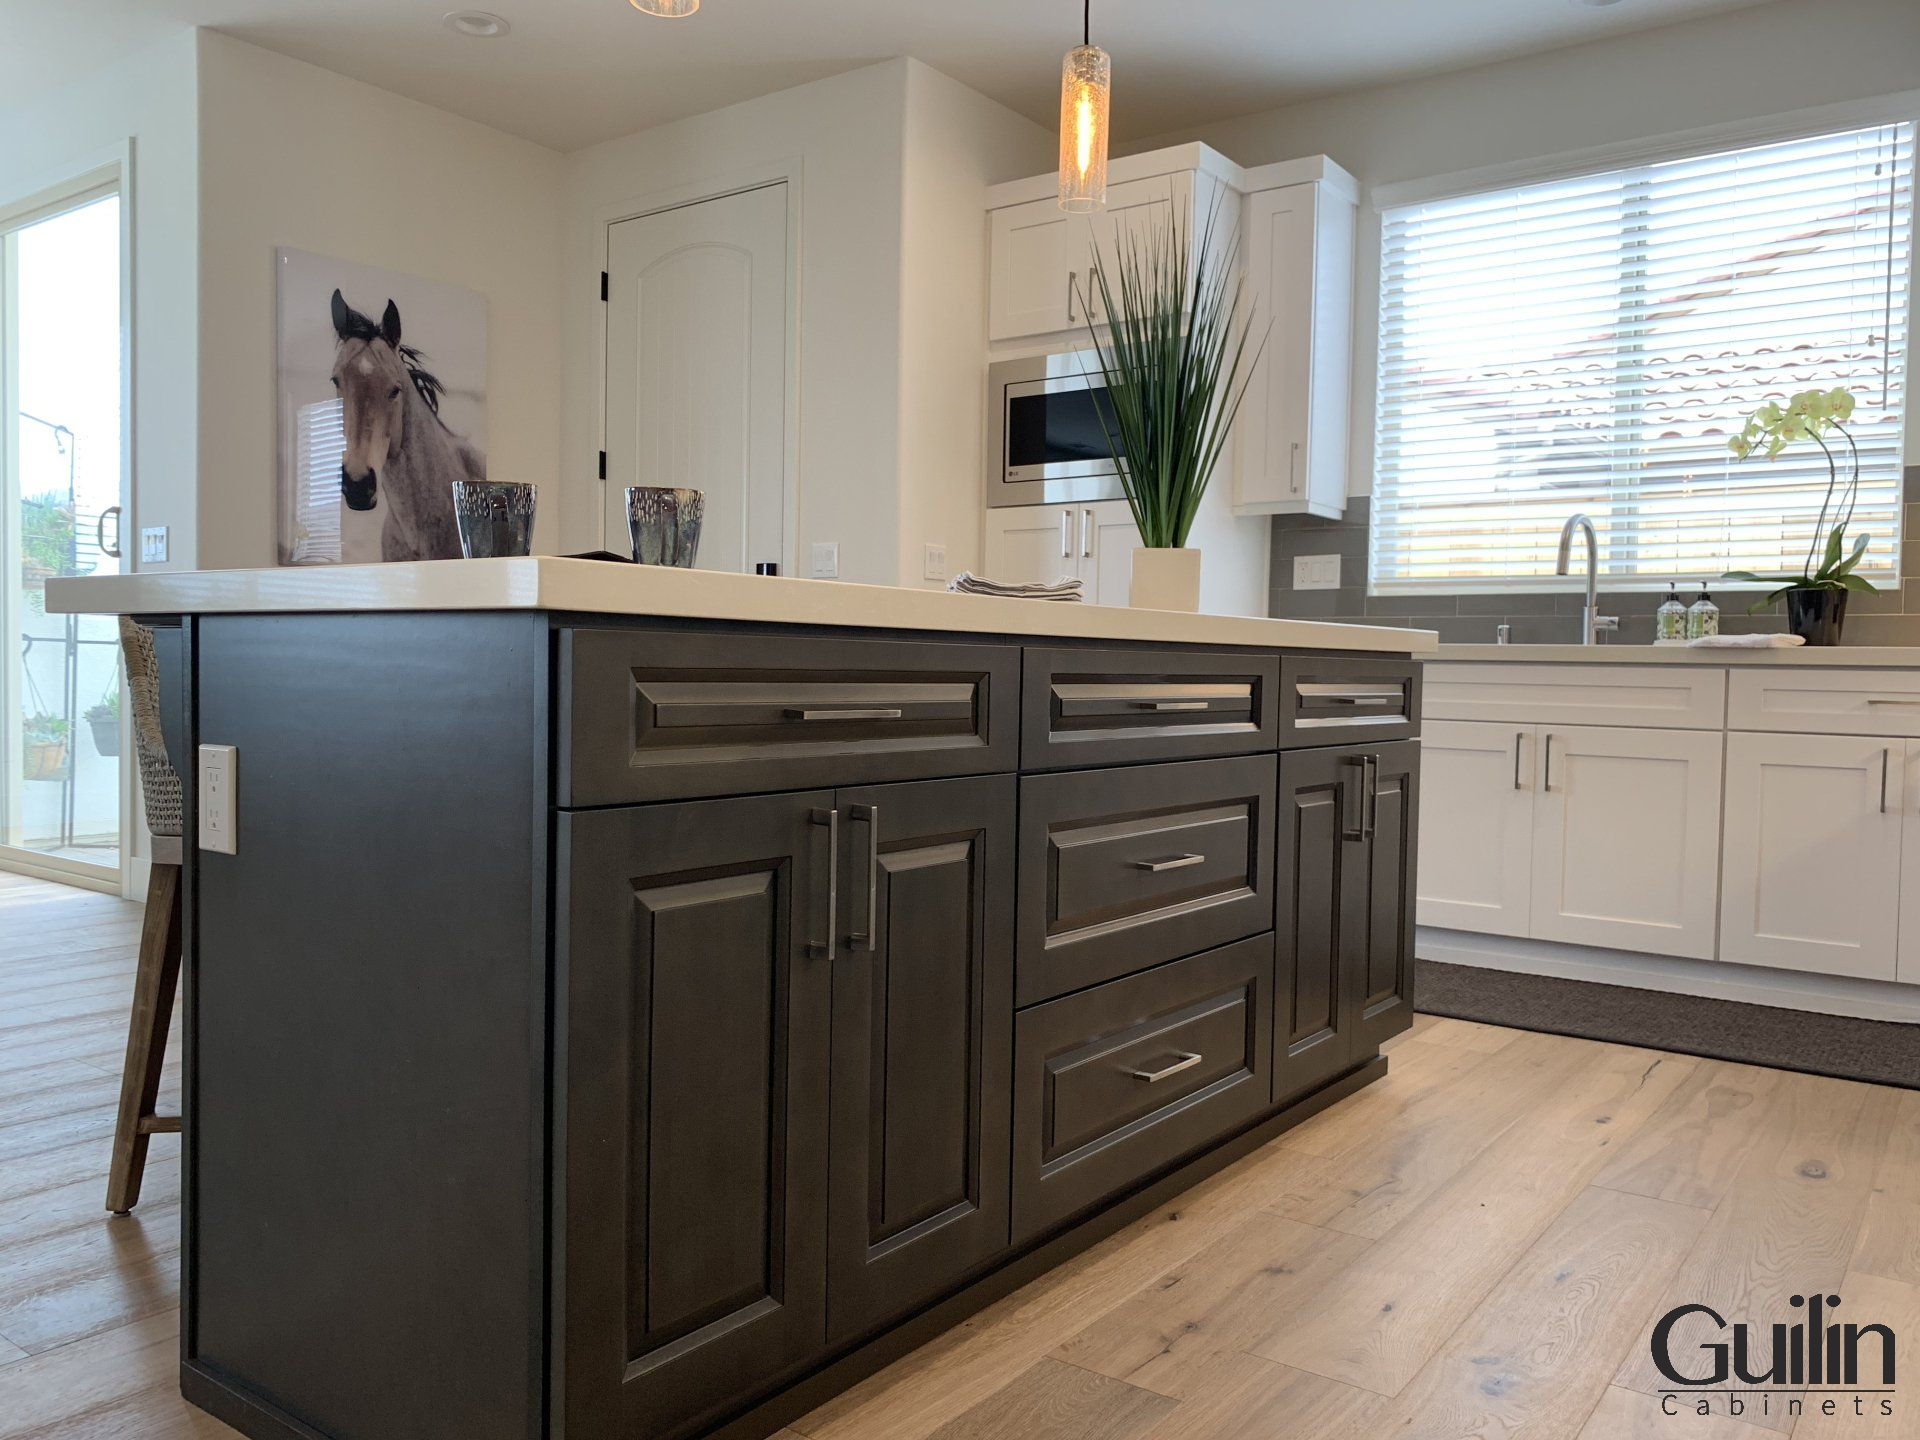 Refacing cabinets is quicker and less disruptive process than a complete renovation kitchen